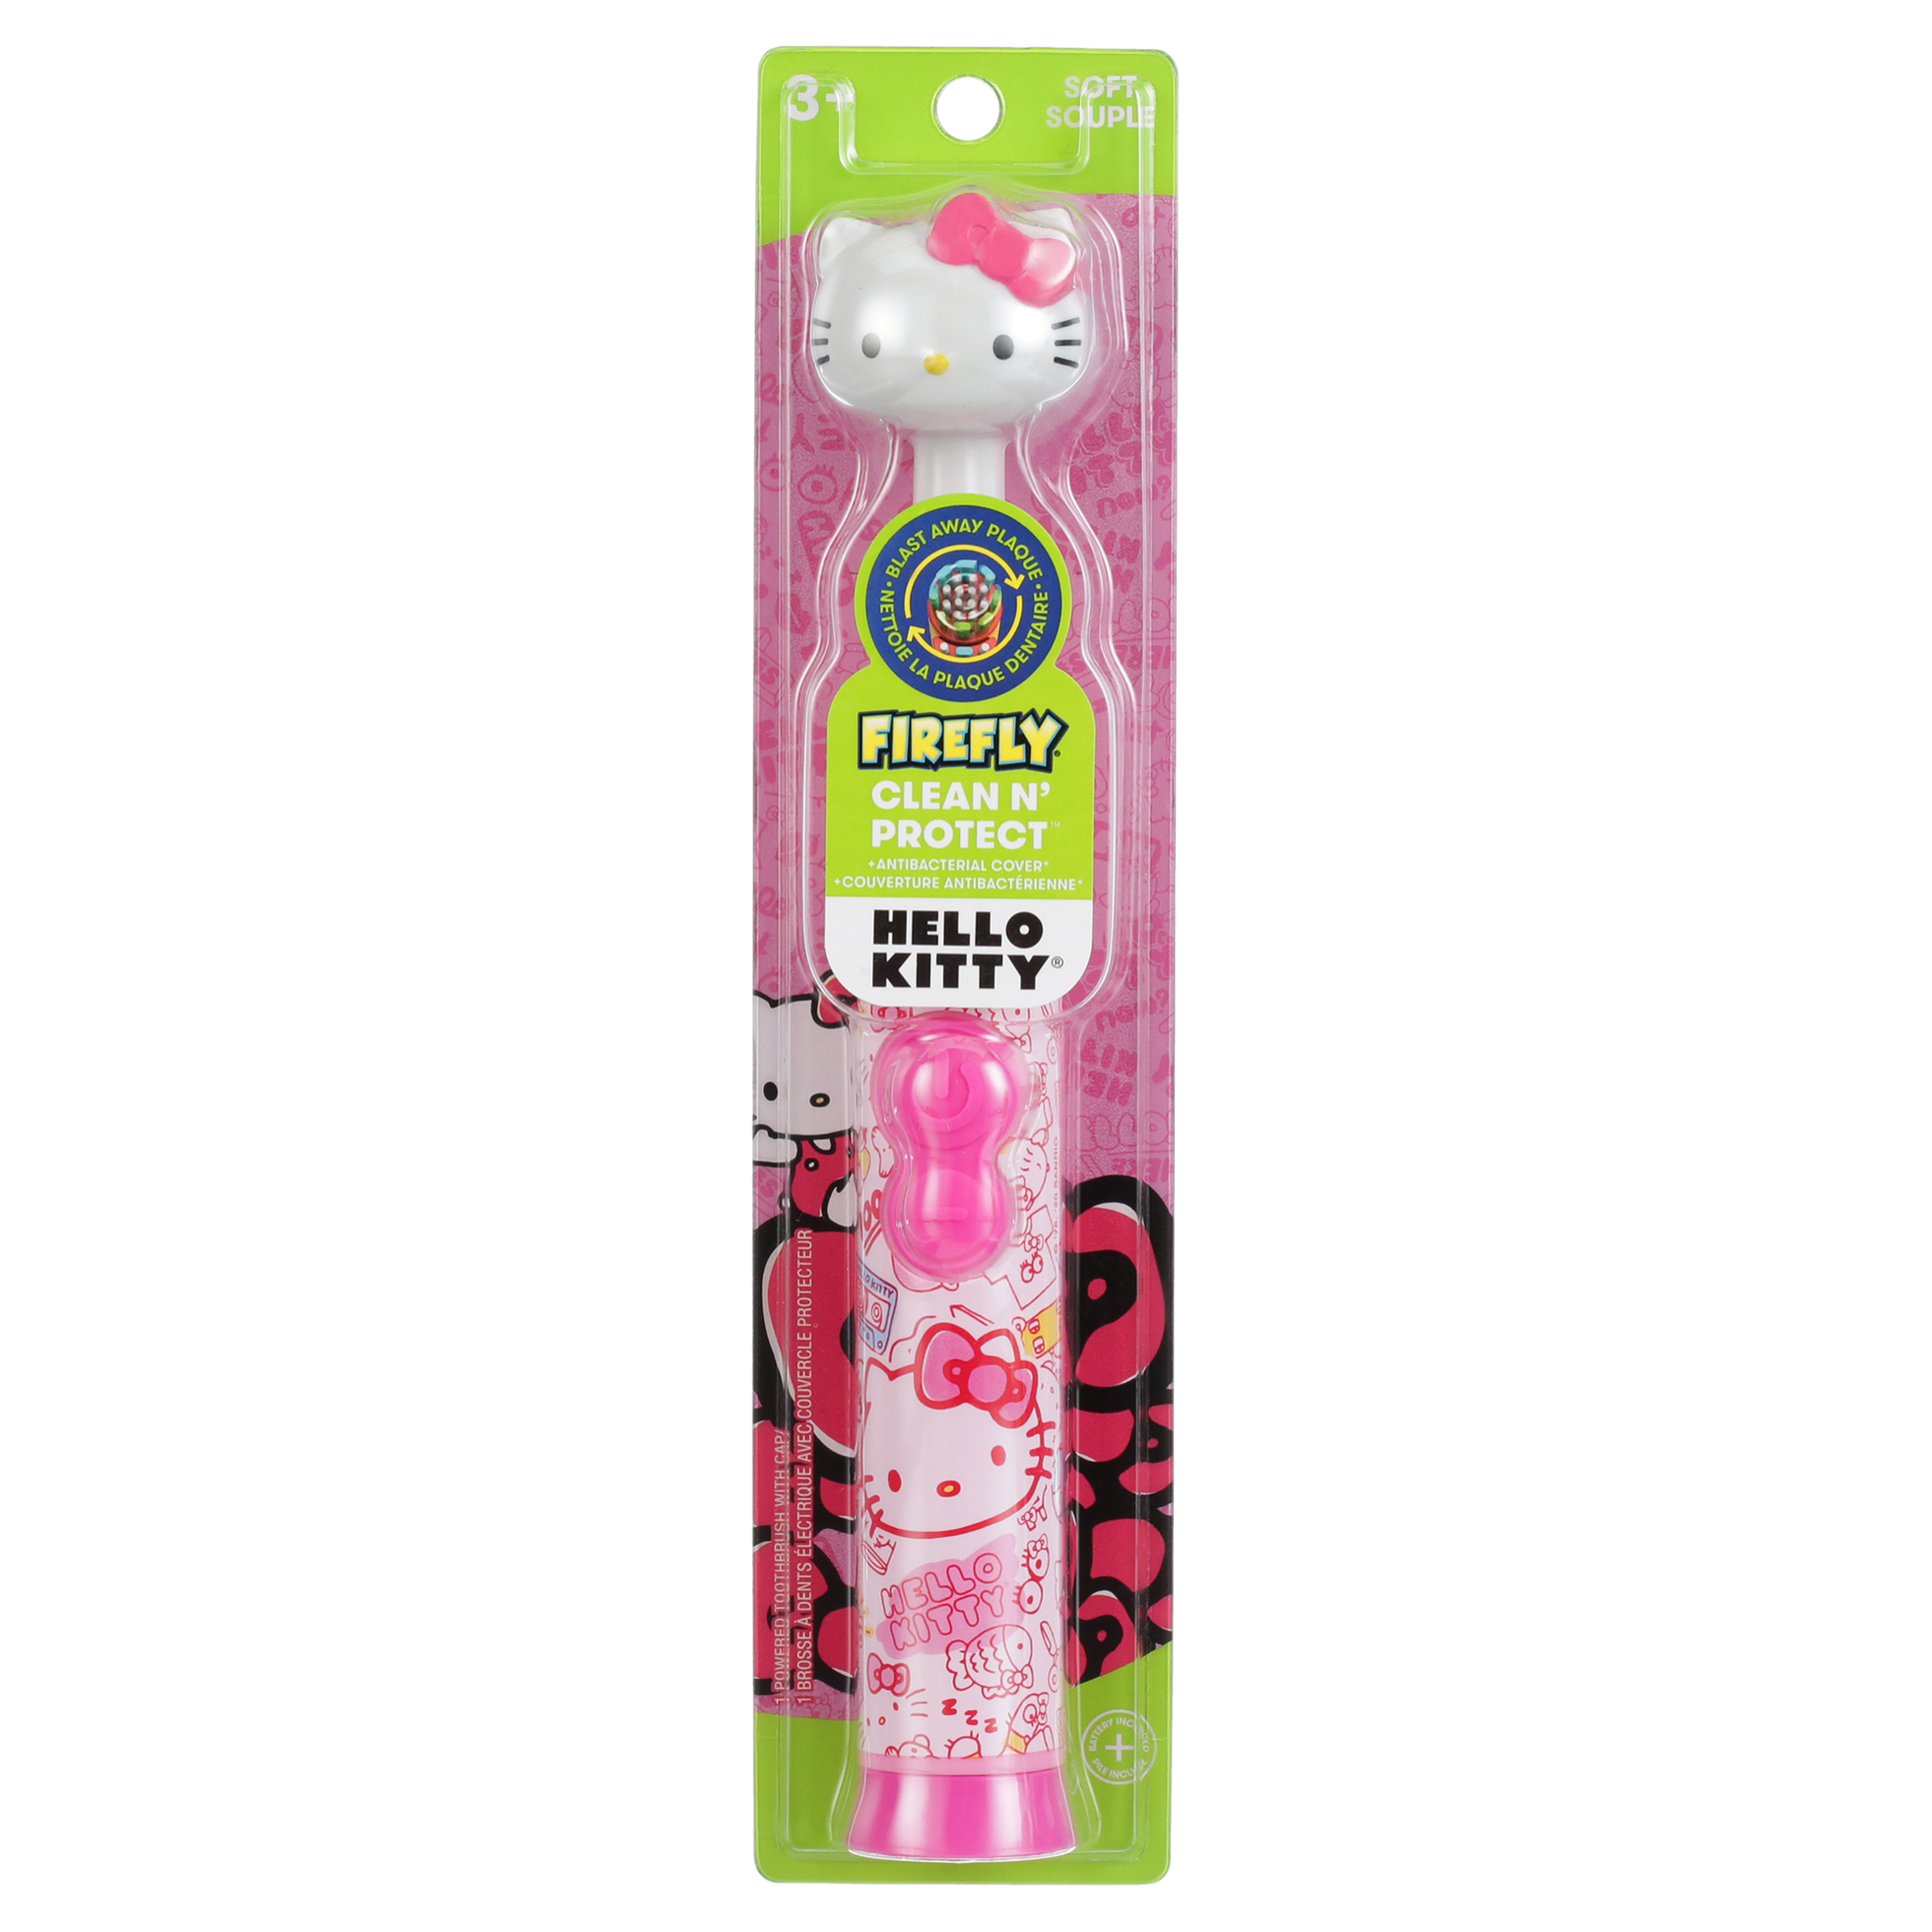 Firefly Hello Kitty Power Toothbrush with Cover, Battery Included, Ages 3+ - image 7 of 10